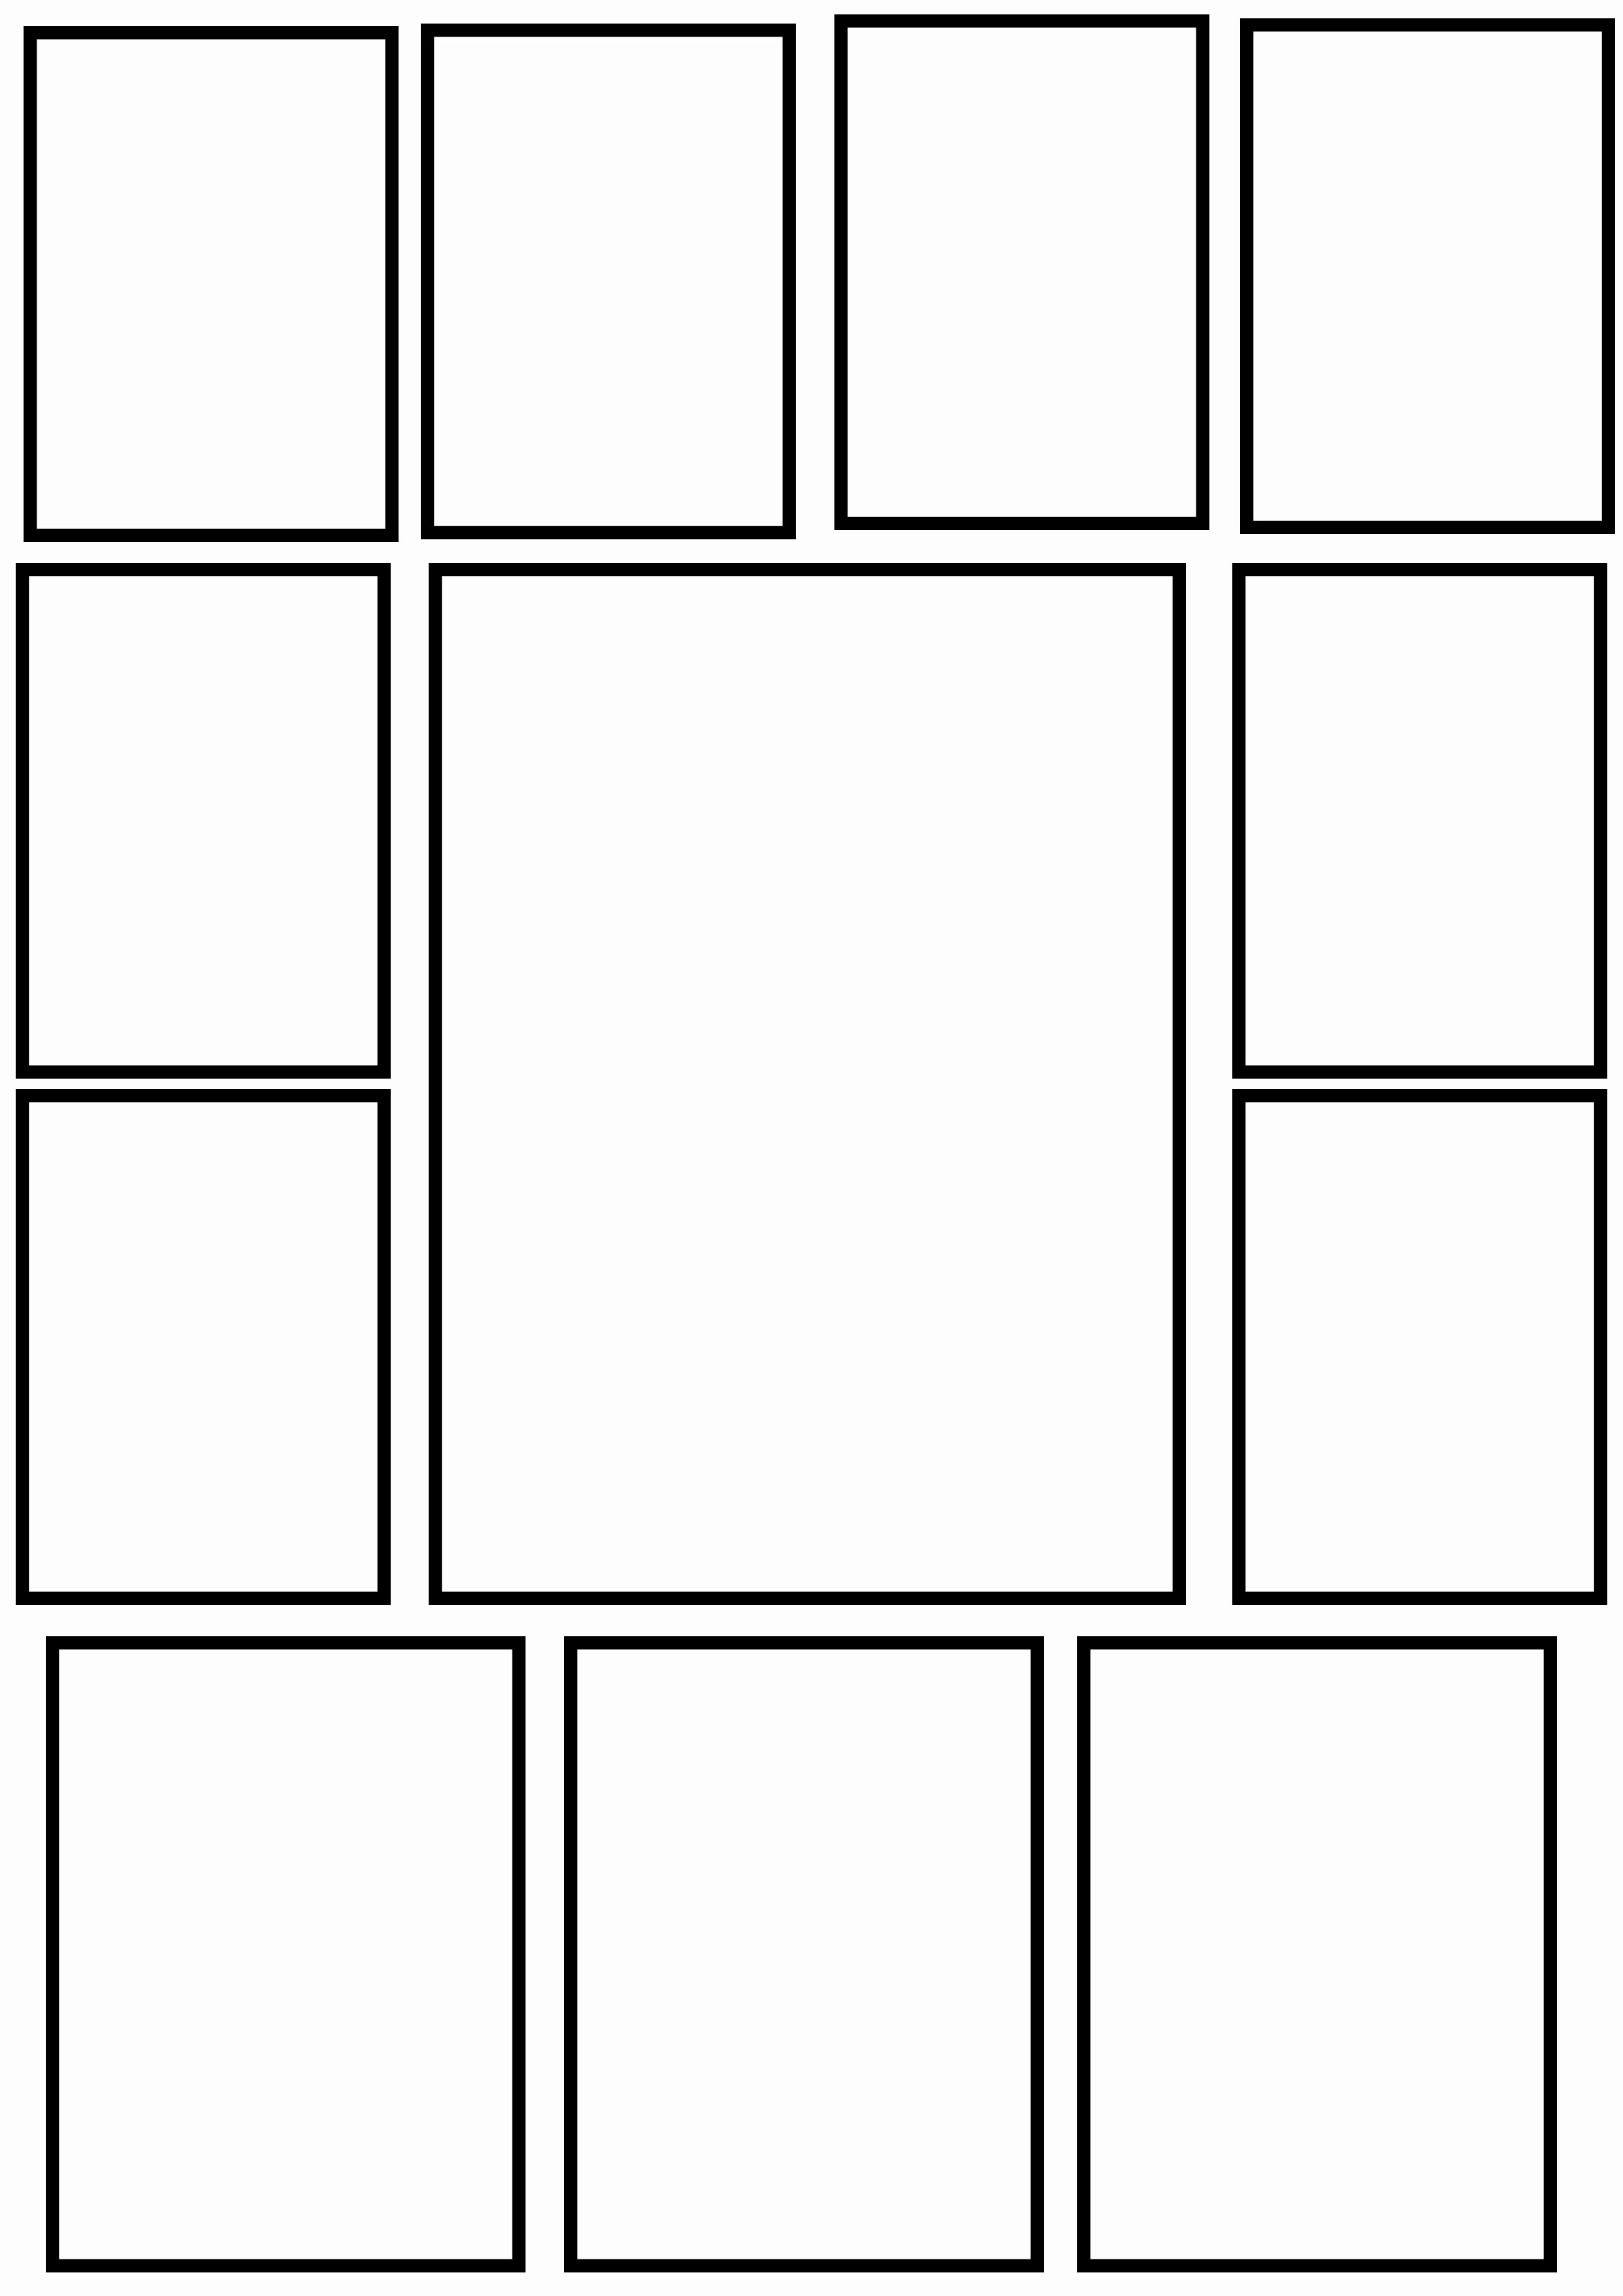 Comic Strip Template Word Awesome Setting Out Layouts for the Ic Strip